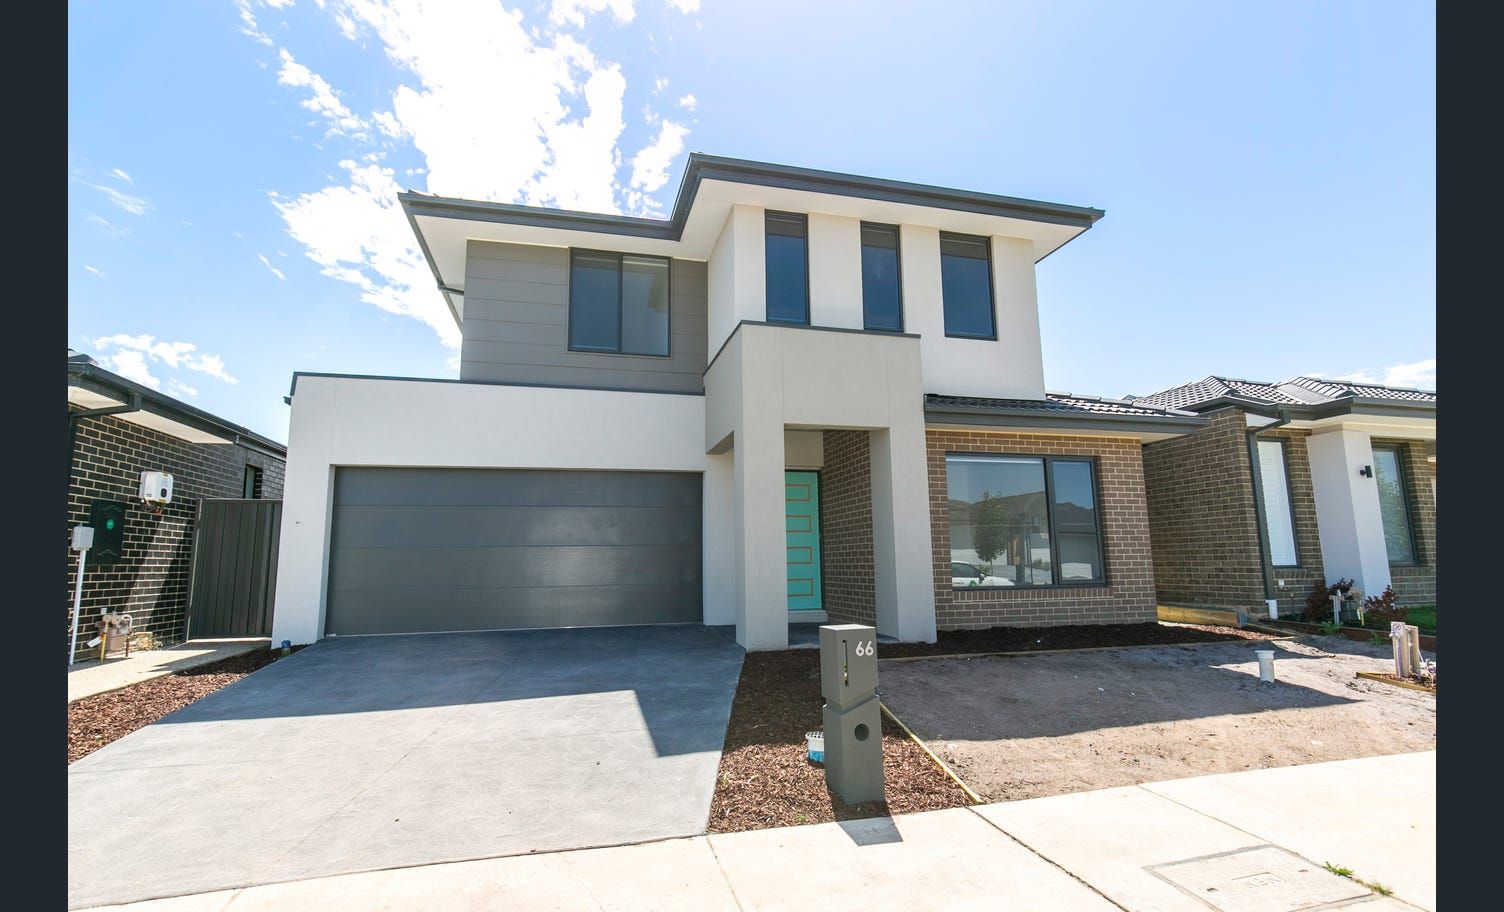 4 bedrooms House in 66 Evica Road CLYDE NORTH VIC, 3978